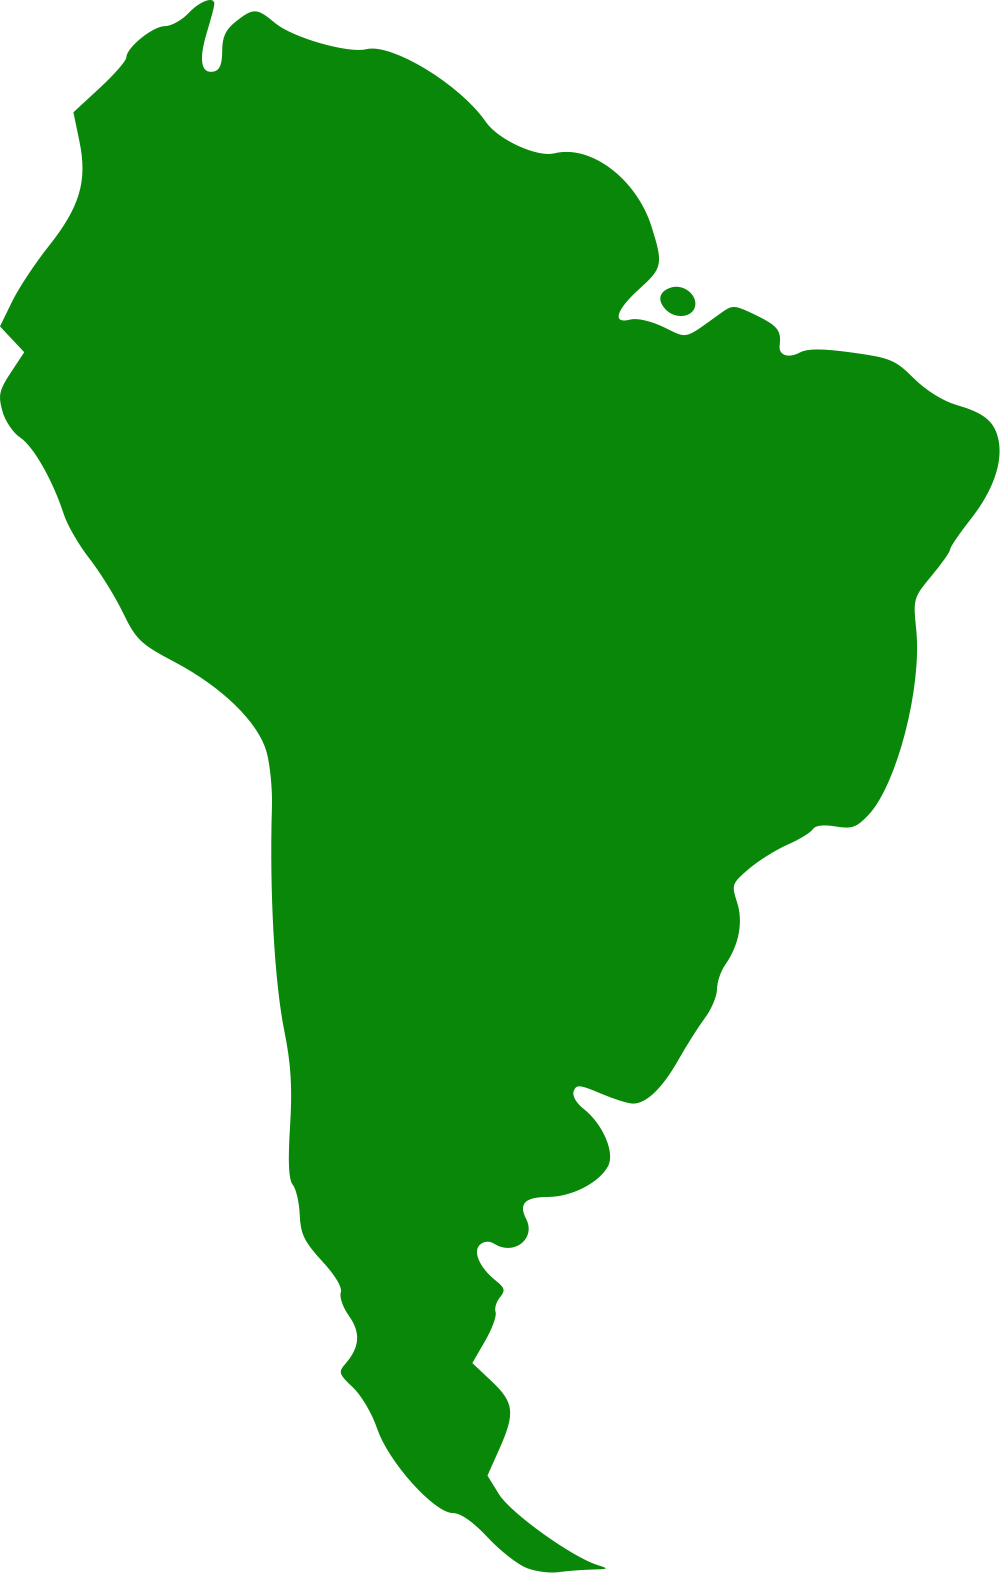 File - Continentsouthamerica - South America (1000x1575)